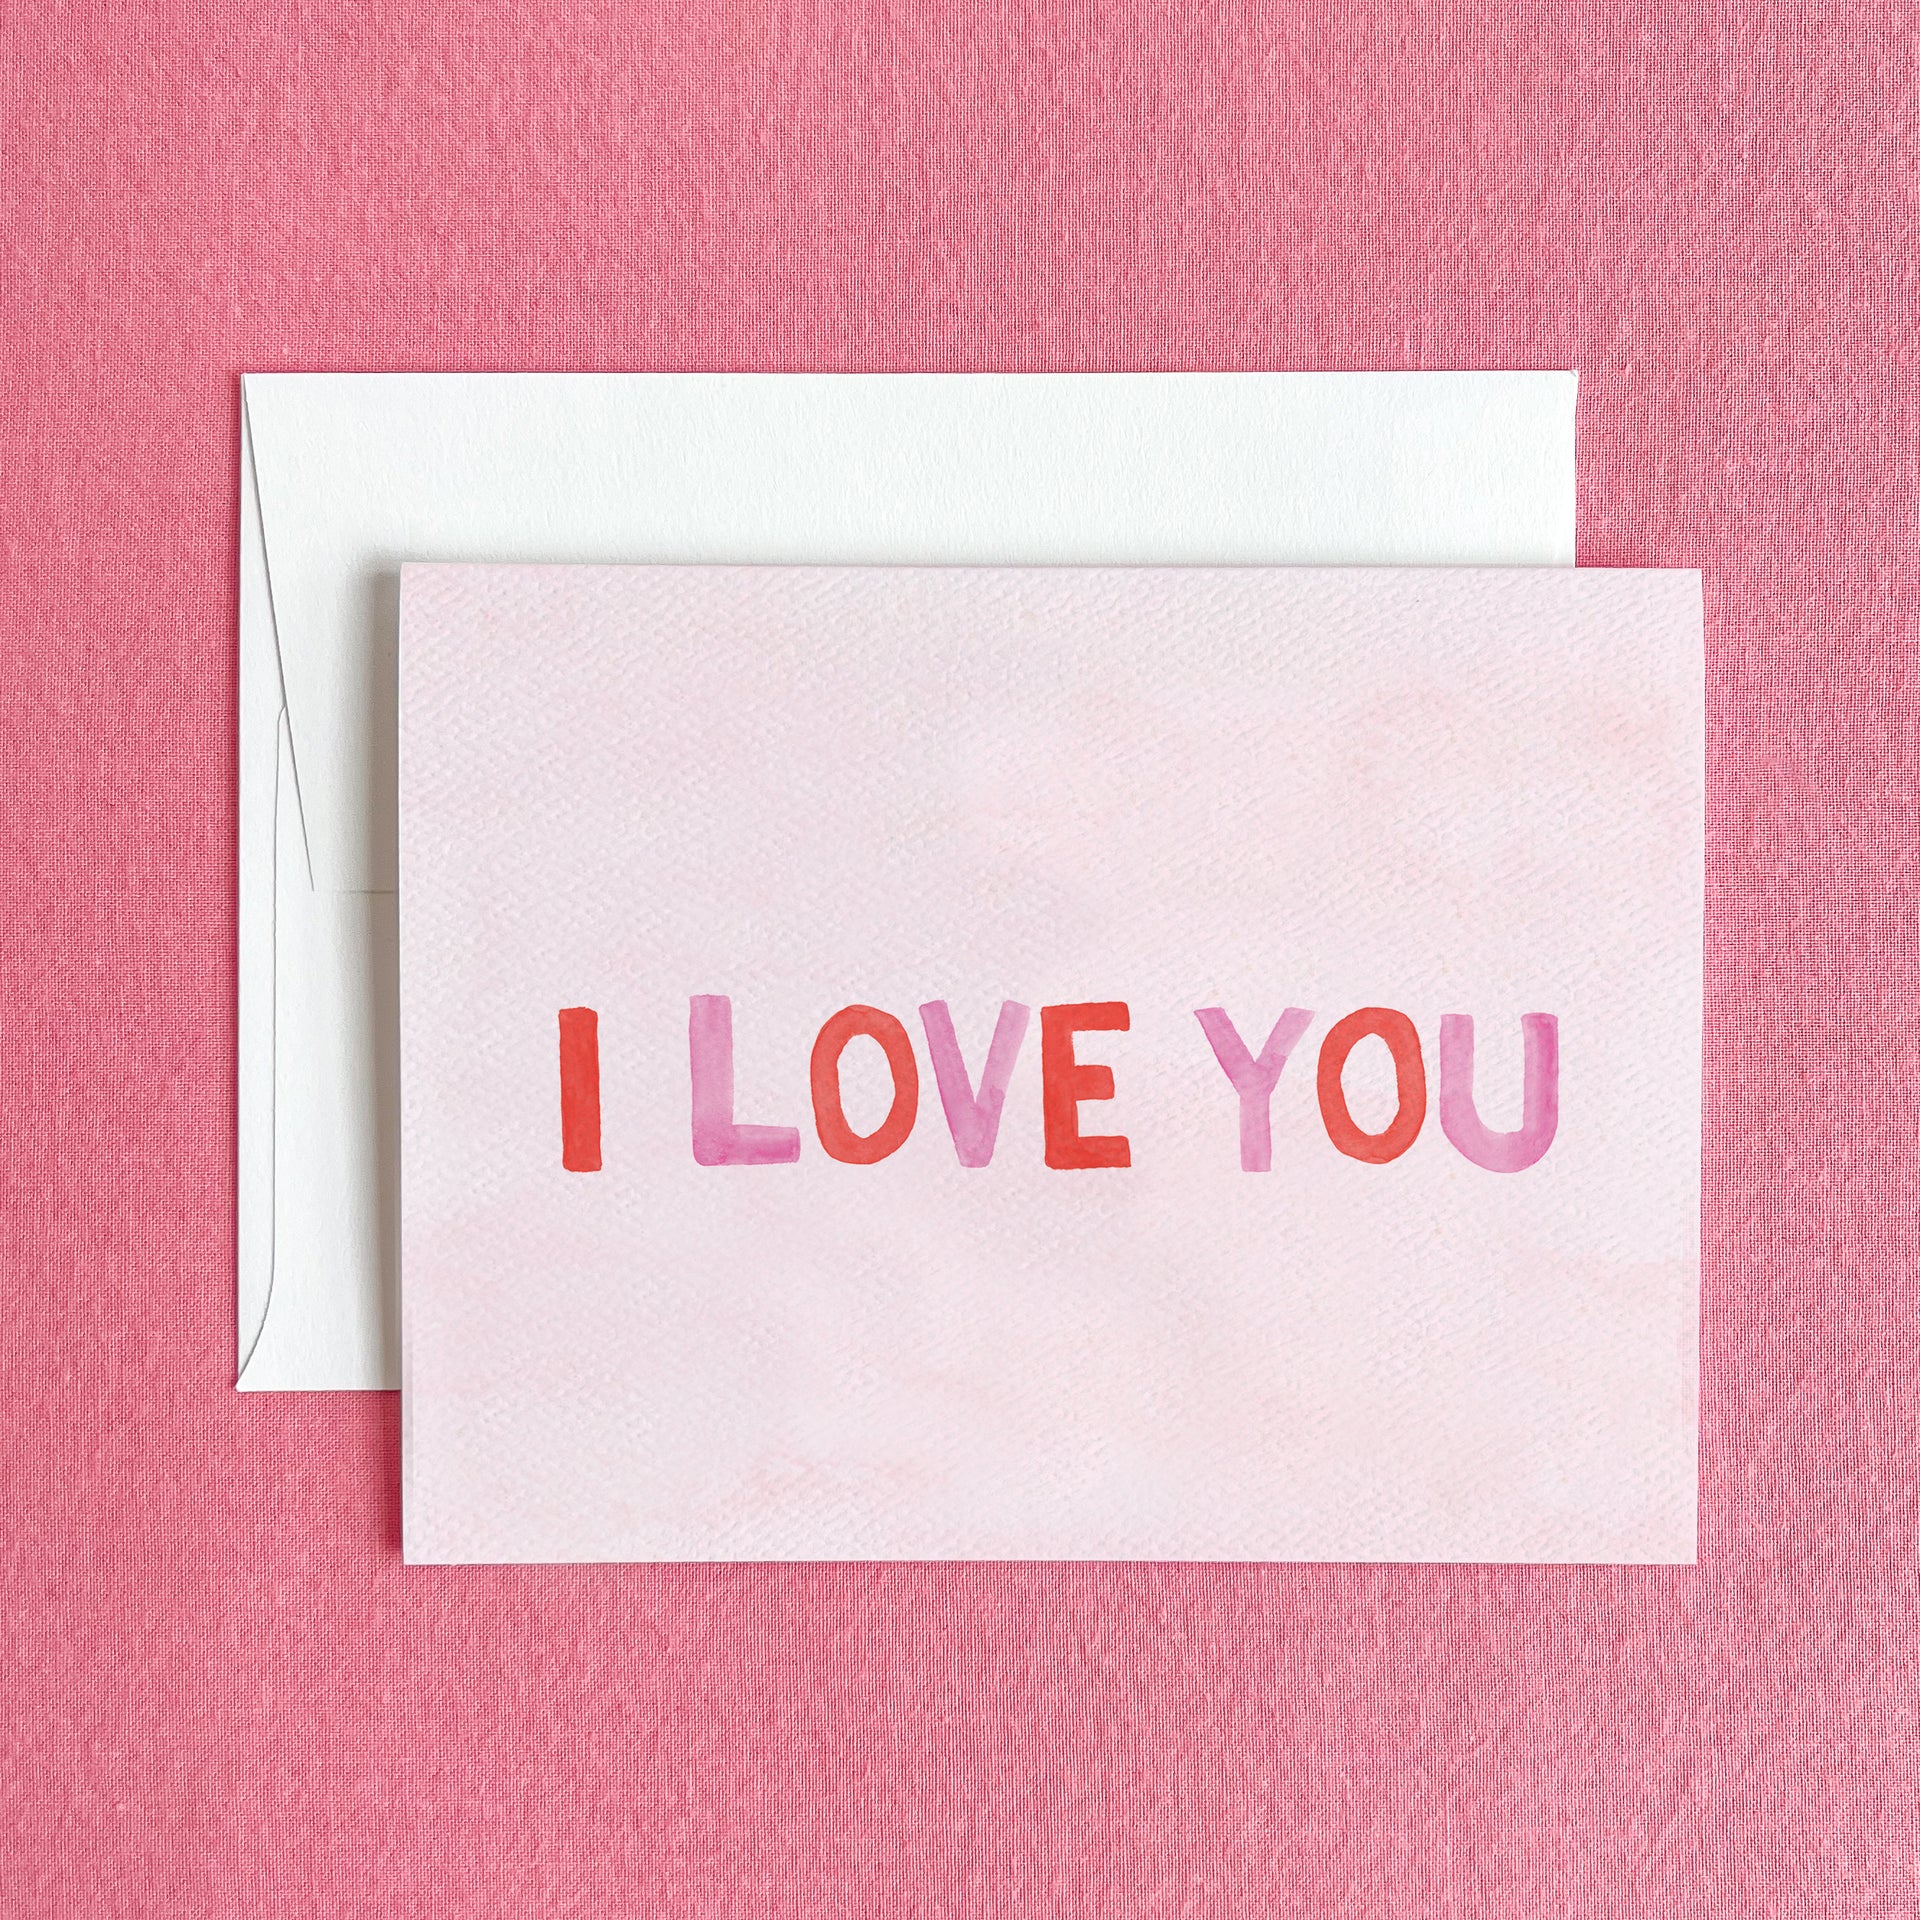 I Love You Greeting Card by Gert & Co